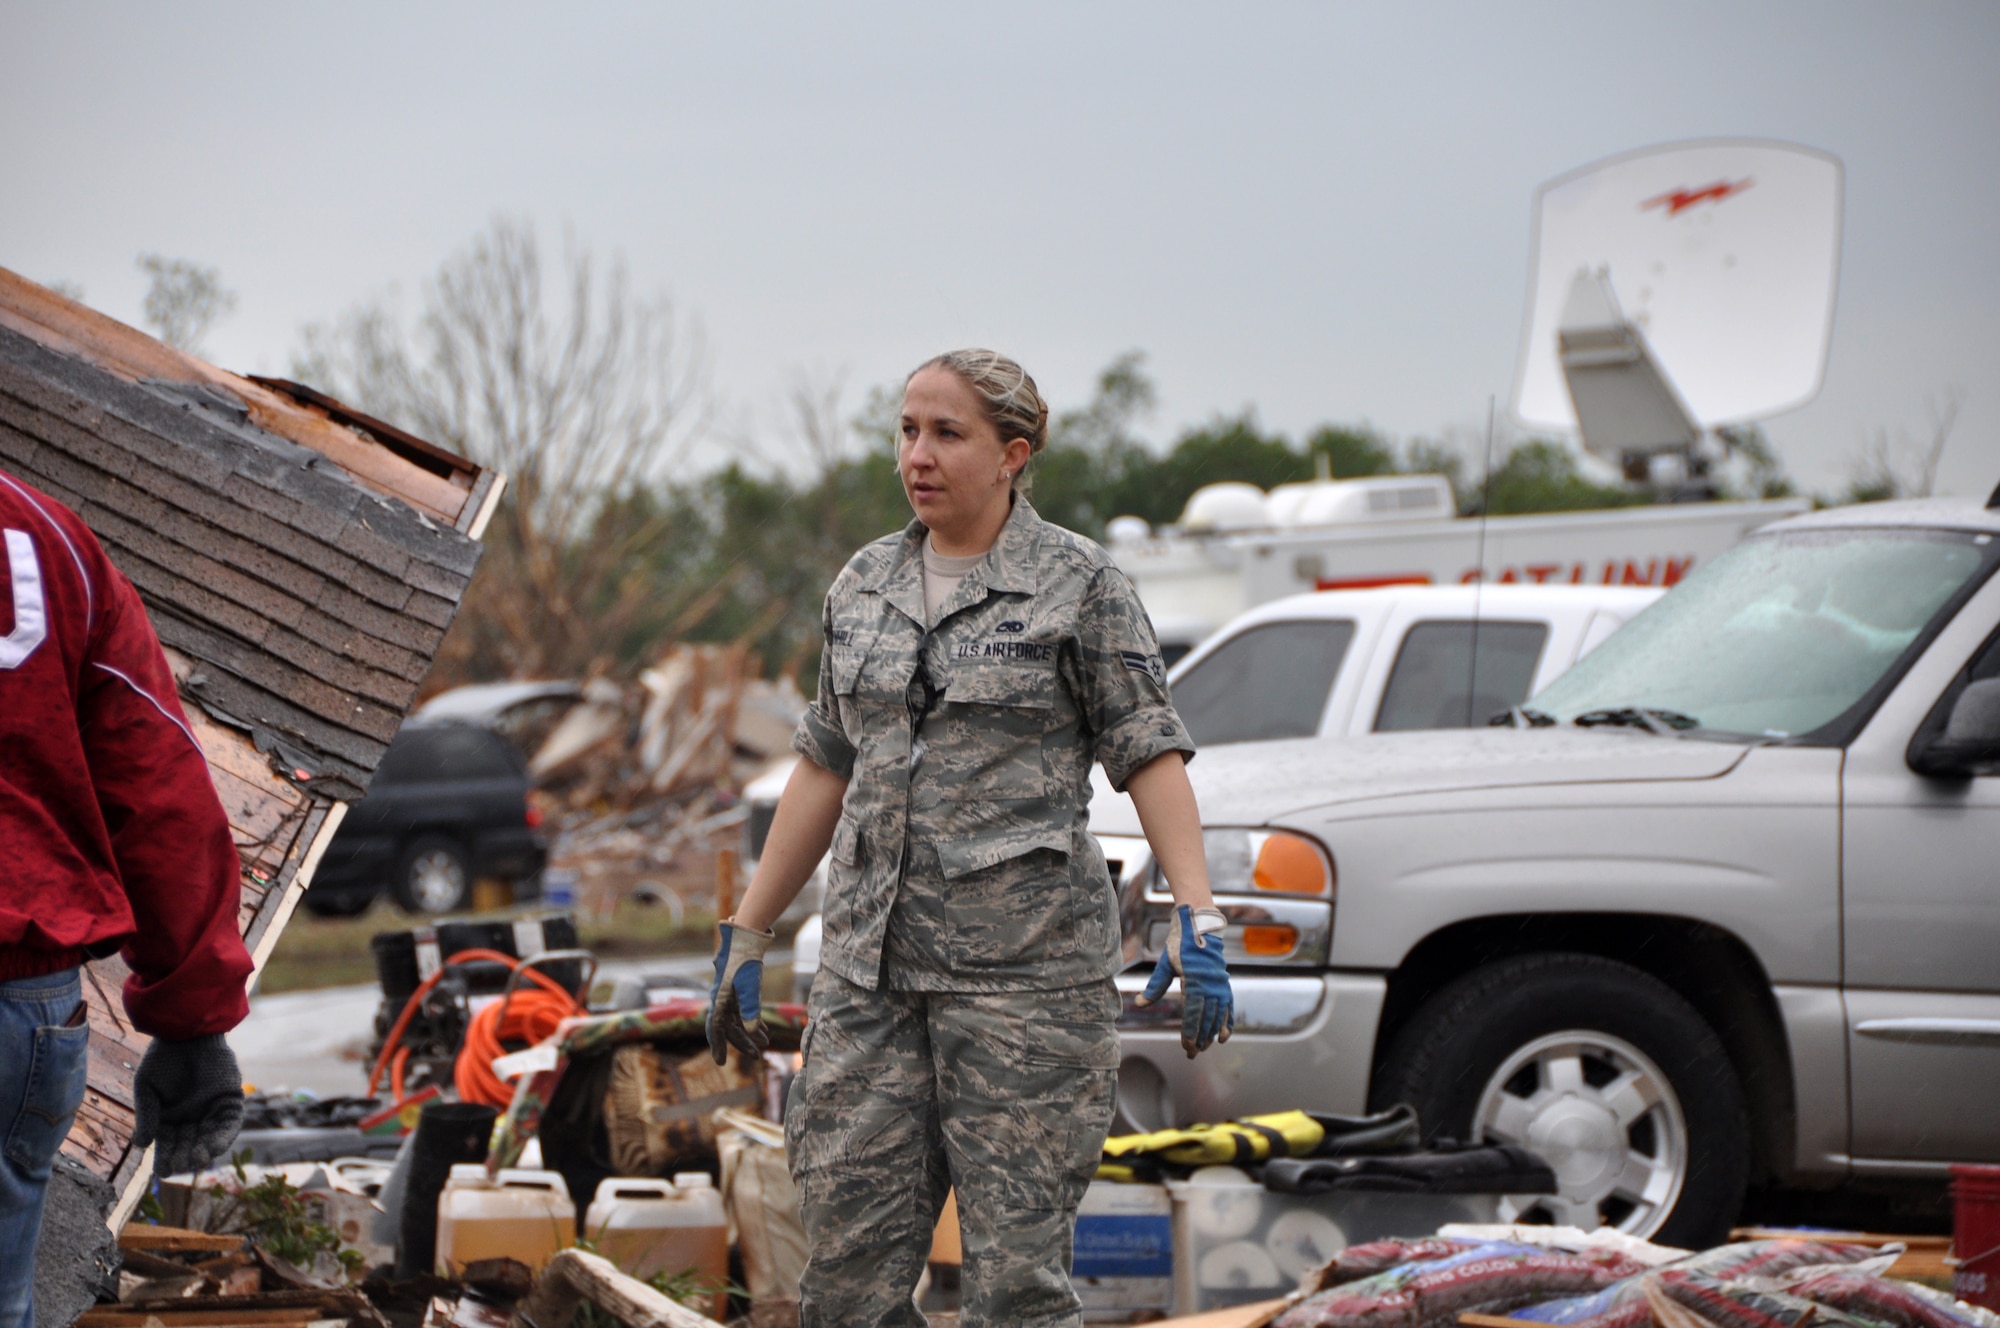 Airman 1st Class Tracy Barnhill, 137th Maintenance Group surveys the damage of her mother’s house after devastating tornado hit the homes of those living in Moore, Okla., May 20, 2013. (U.S. Air Force photo by Senior Airman Mark Hybers)